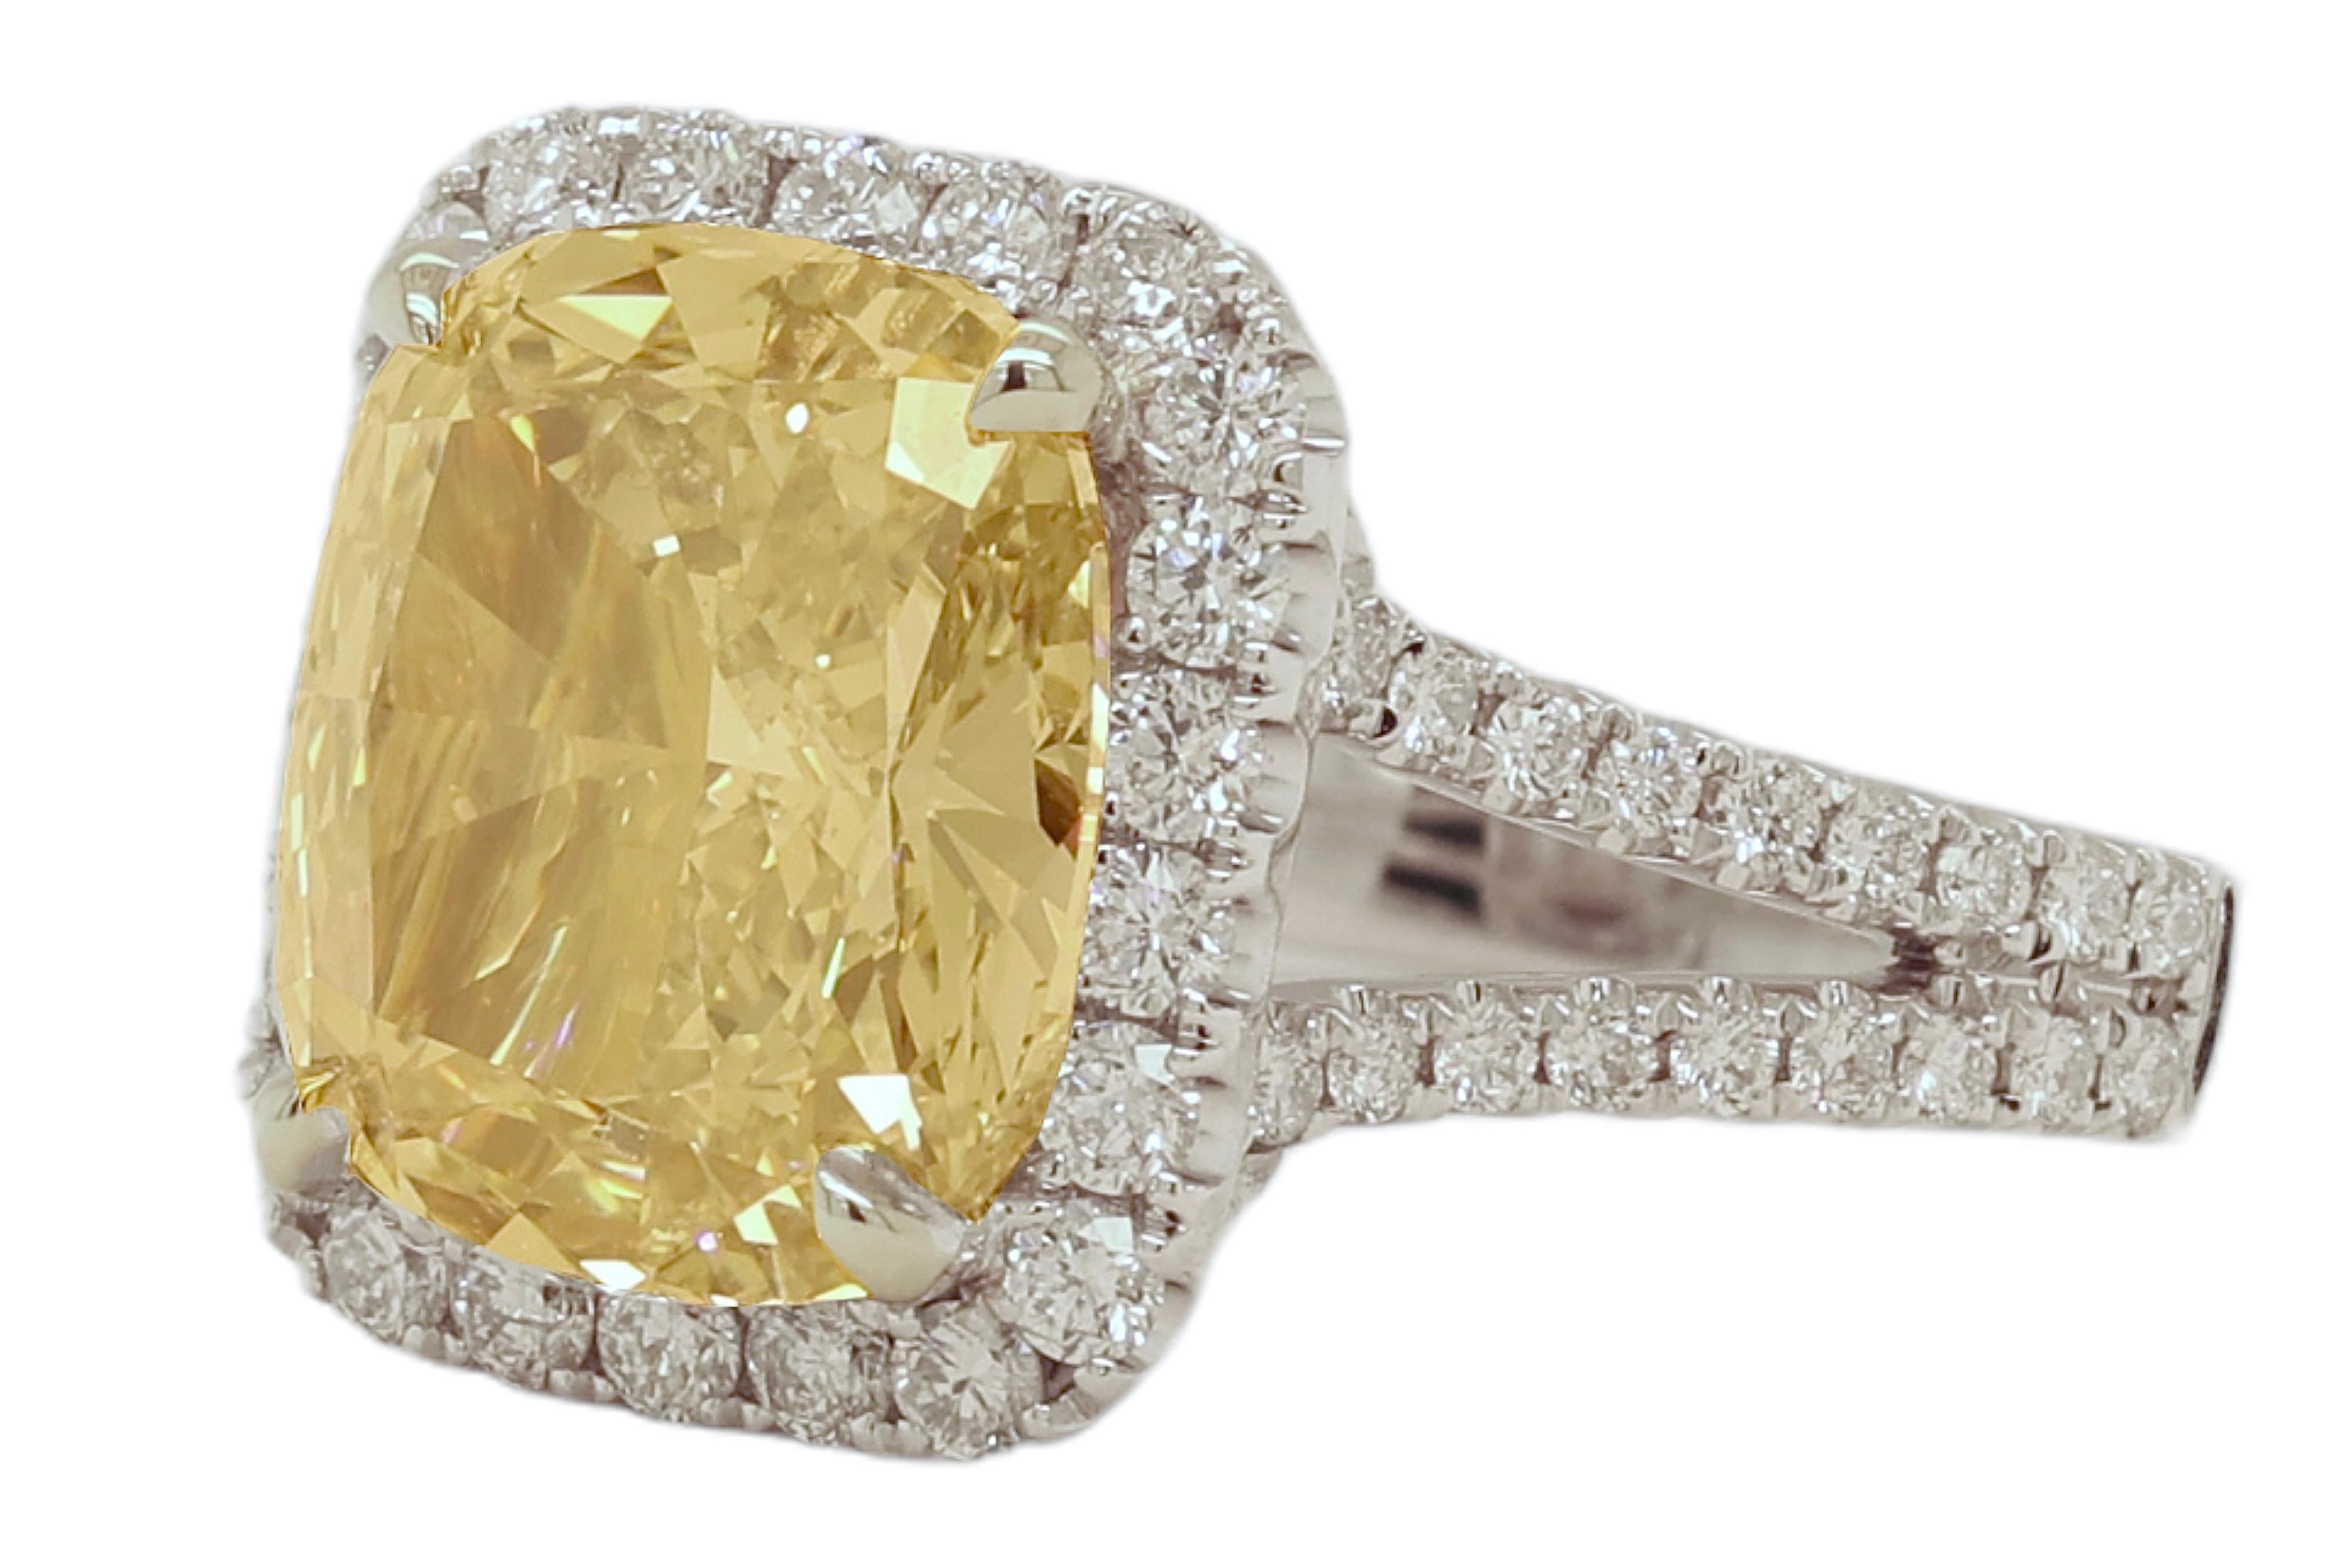 Cushion Cut 18 kt. White Gold Engagement Ring With Large 5 Ct Fancy Light Yellow Diamond For Sale